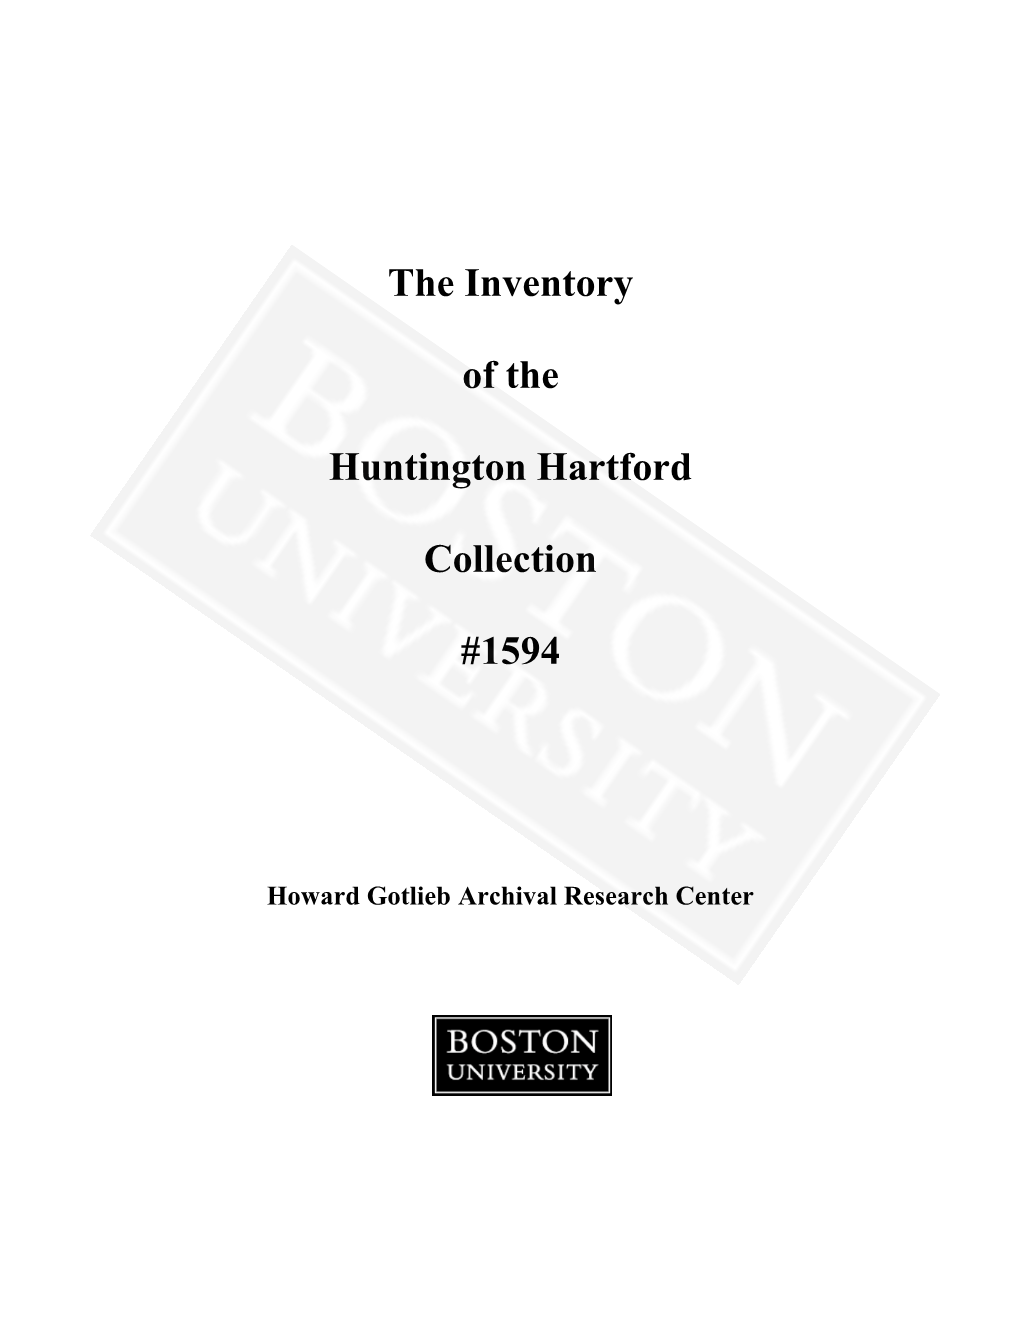 The Inventory of the Huntington Hartford Collection #1594